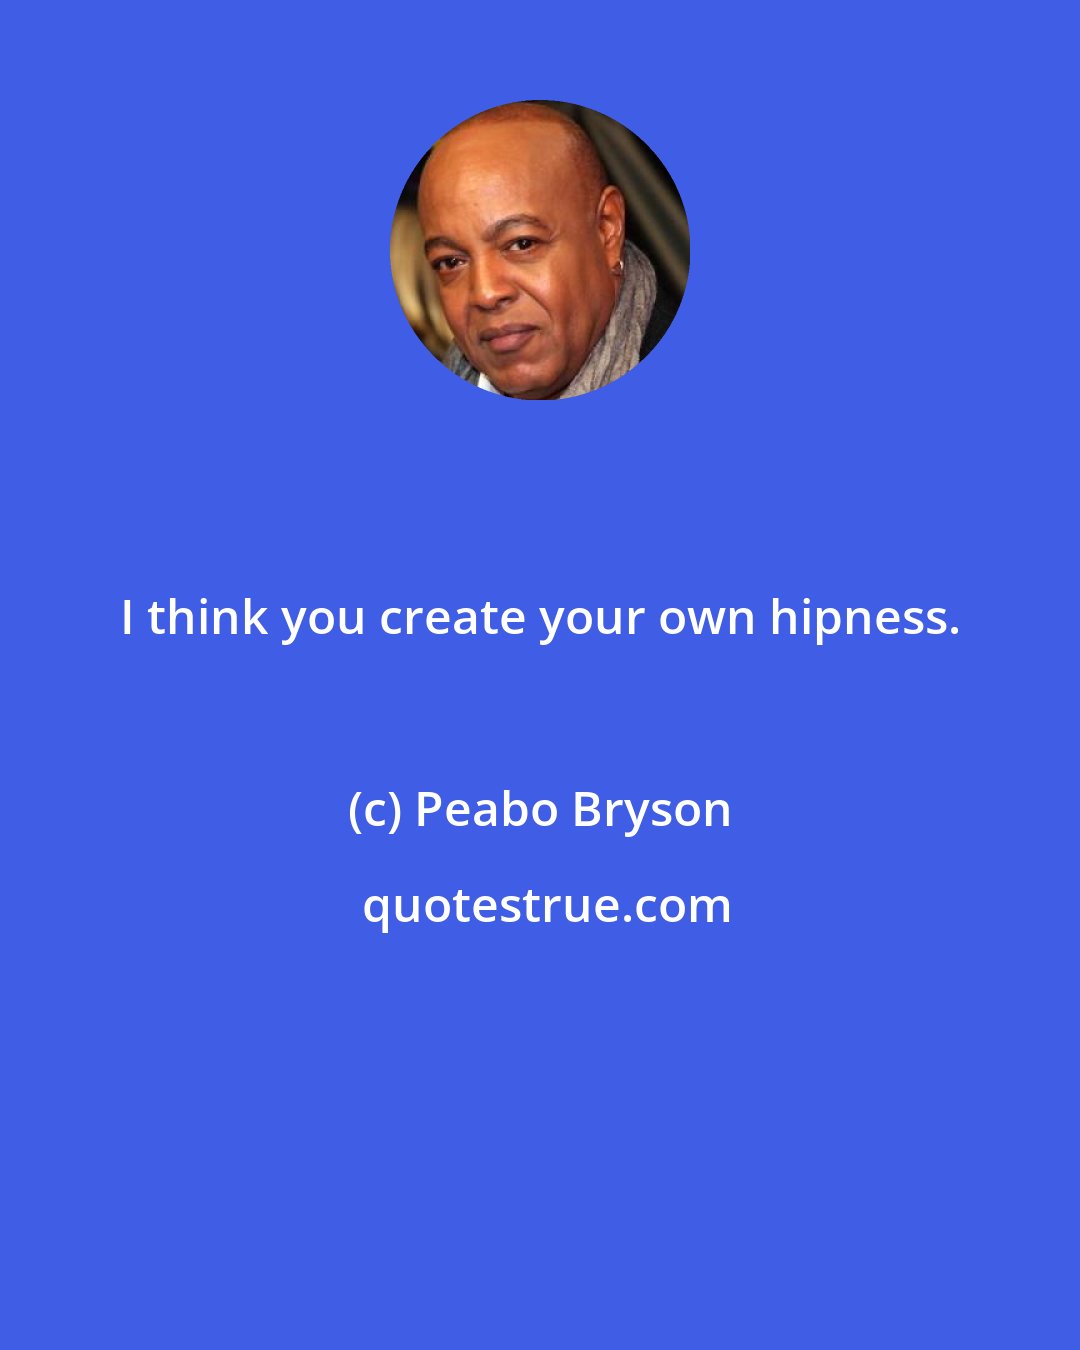 Peabo Bryson: I think you create your own hipness.